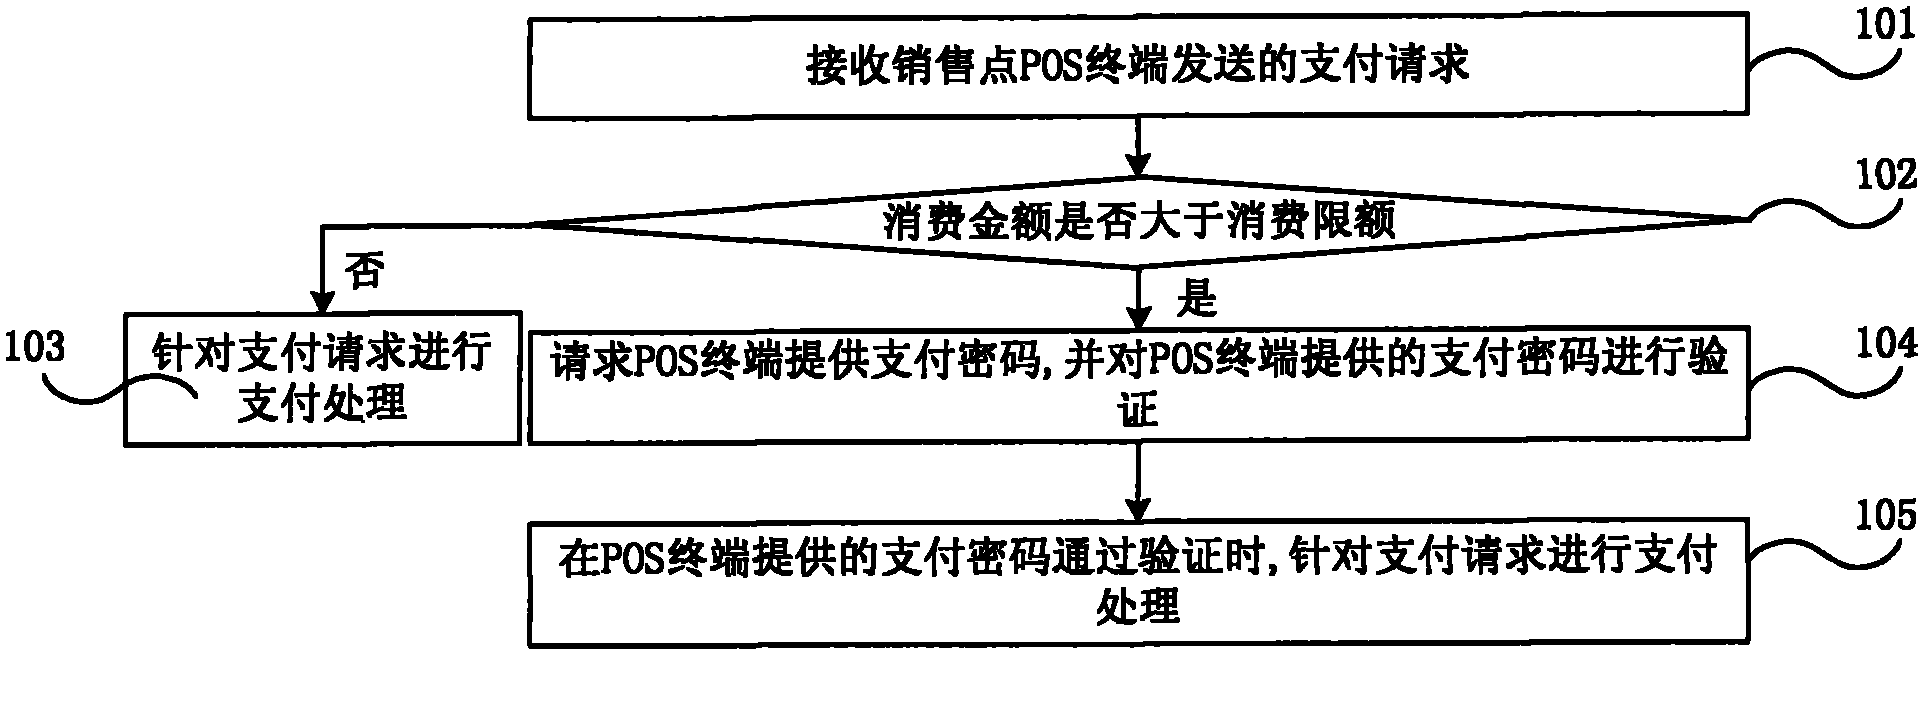 Online consumption account-based non-contact payment method and system